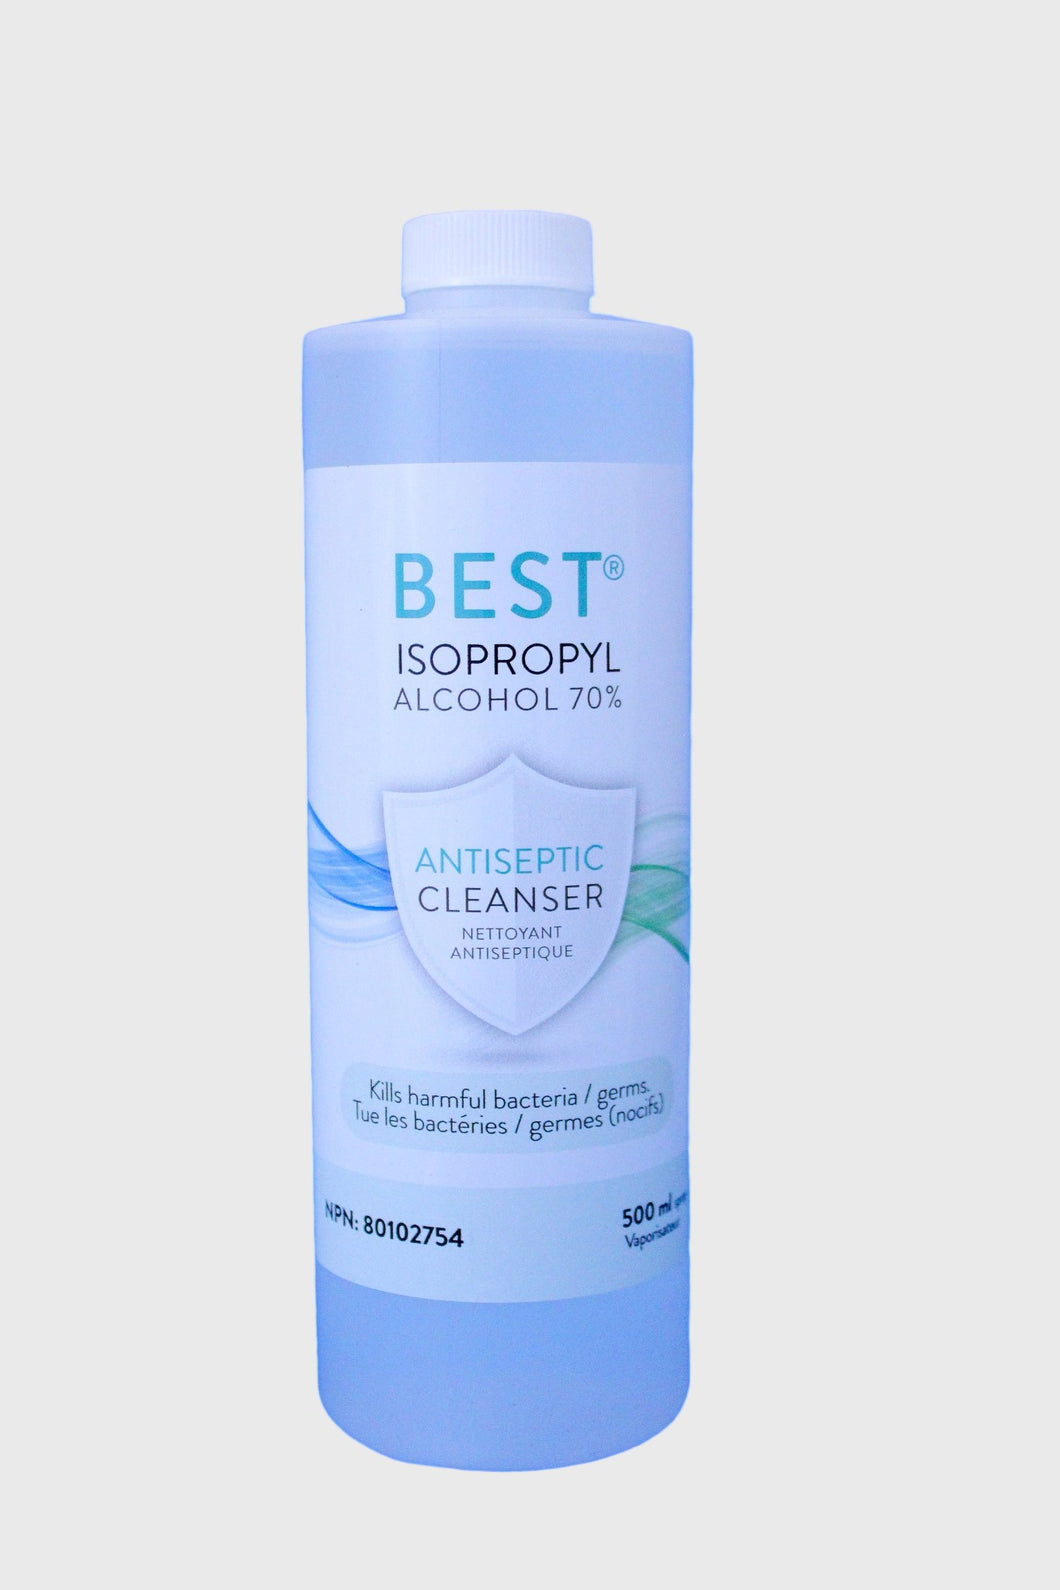 Antiseptic Cleanser